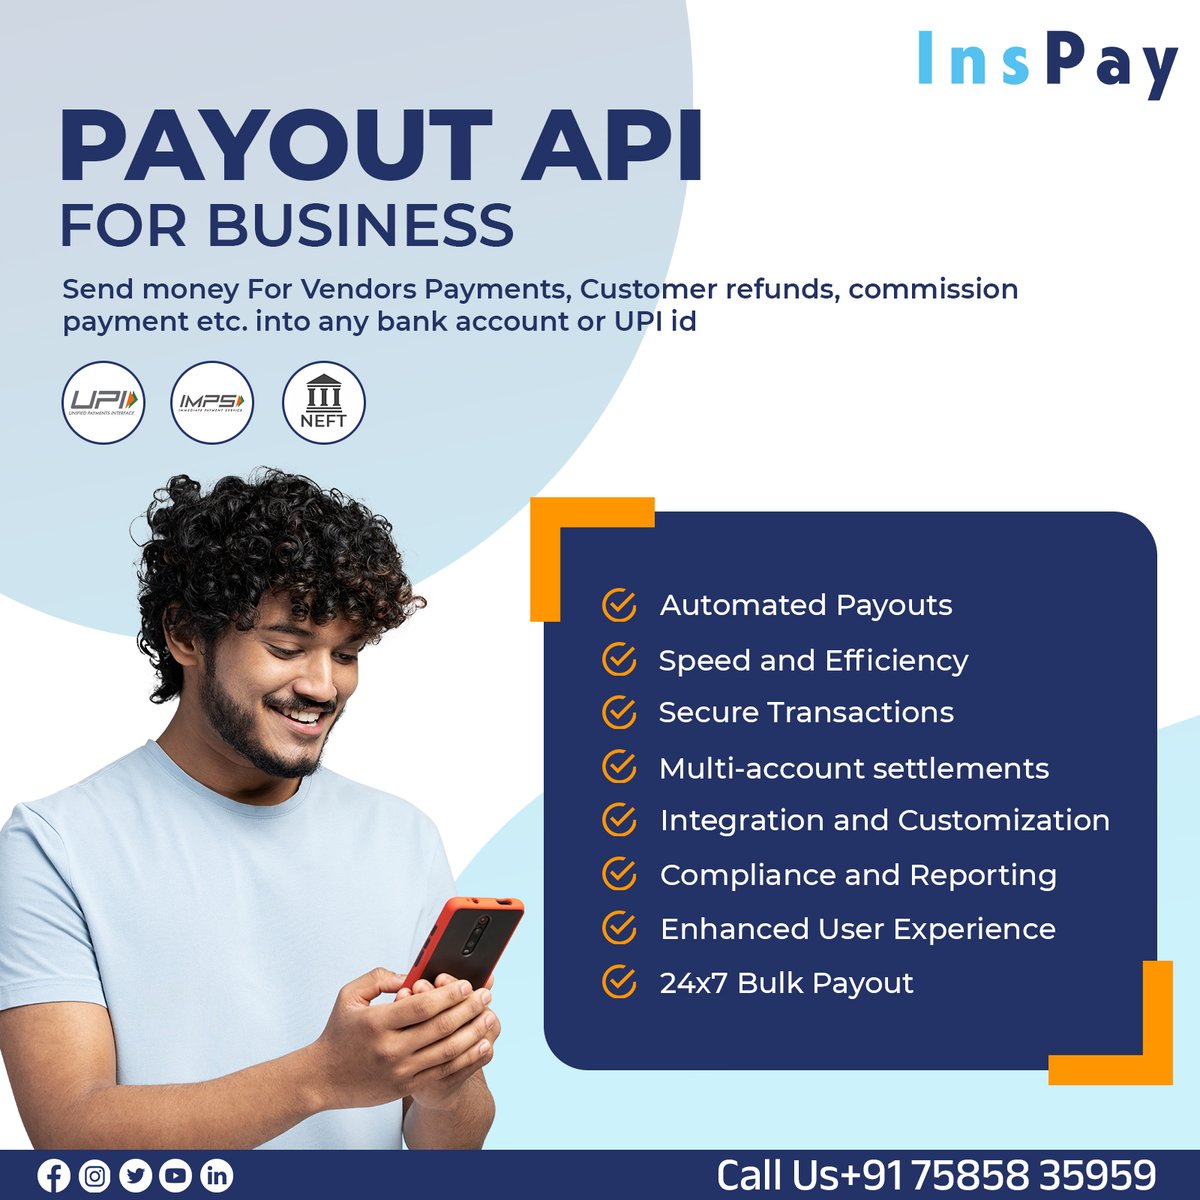 Looking for a reliable and efficient #Payout #API for your business? #Inspay has got you covered!

#PayoutAPI #PaymentSolutions #BusinessEfficiency #SecurePayouts #SeamlessTransactions #BusinessGrowth #PaymentAutomation #APIIntegration #DigitalPayments #OnlineBusiness #fintech